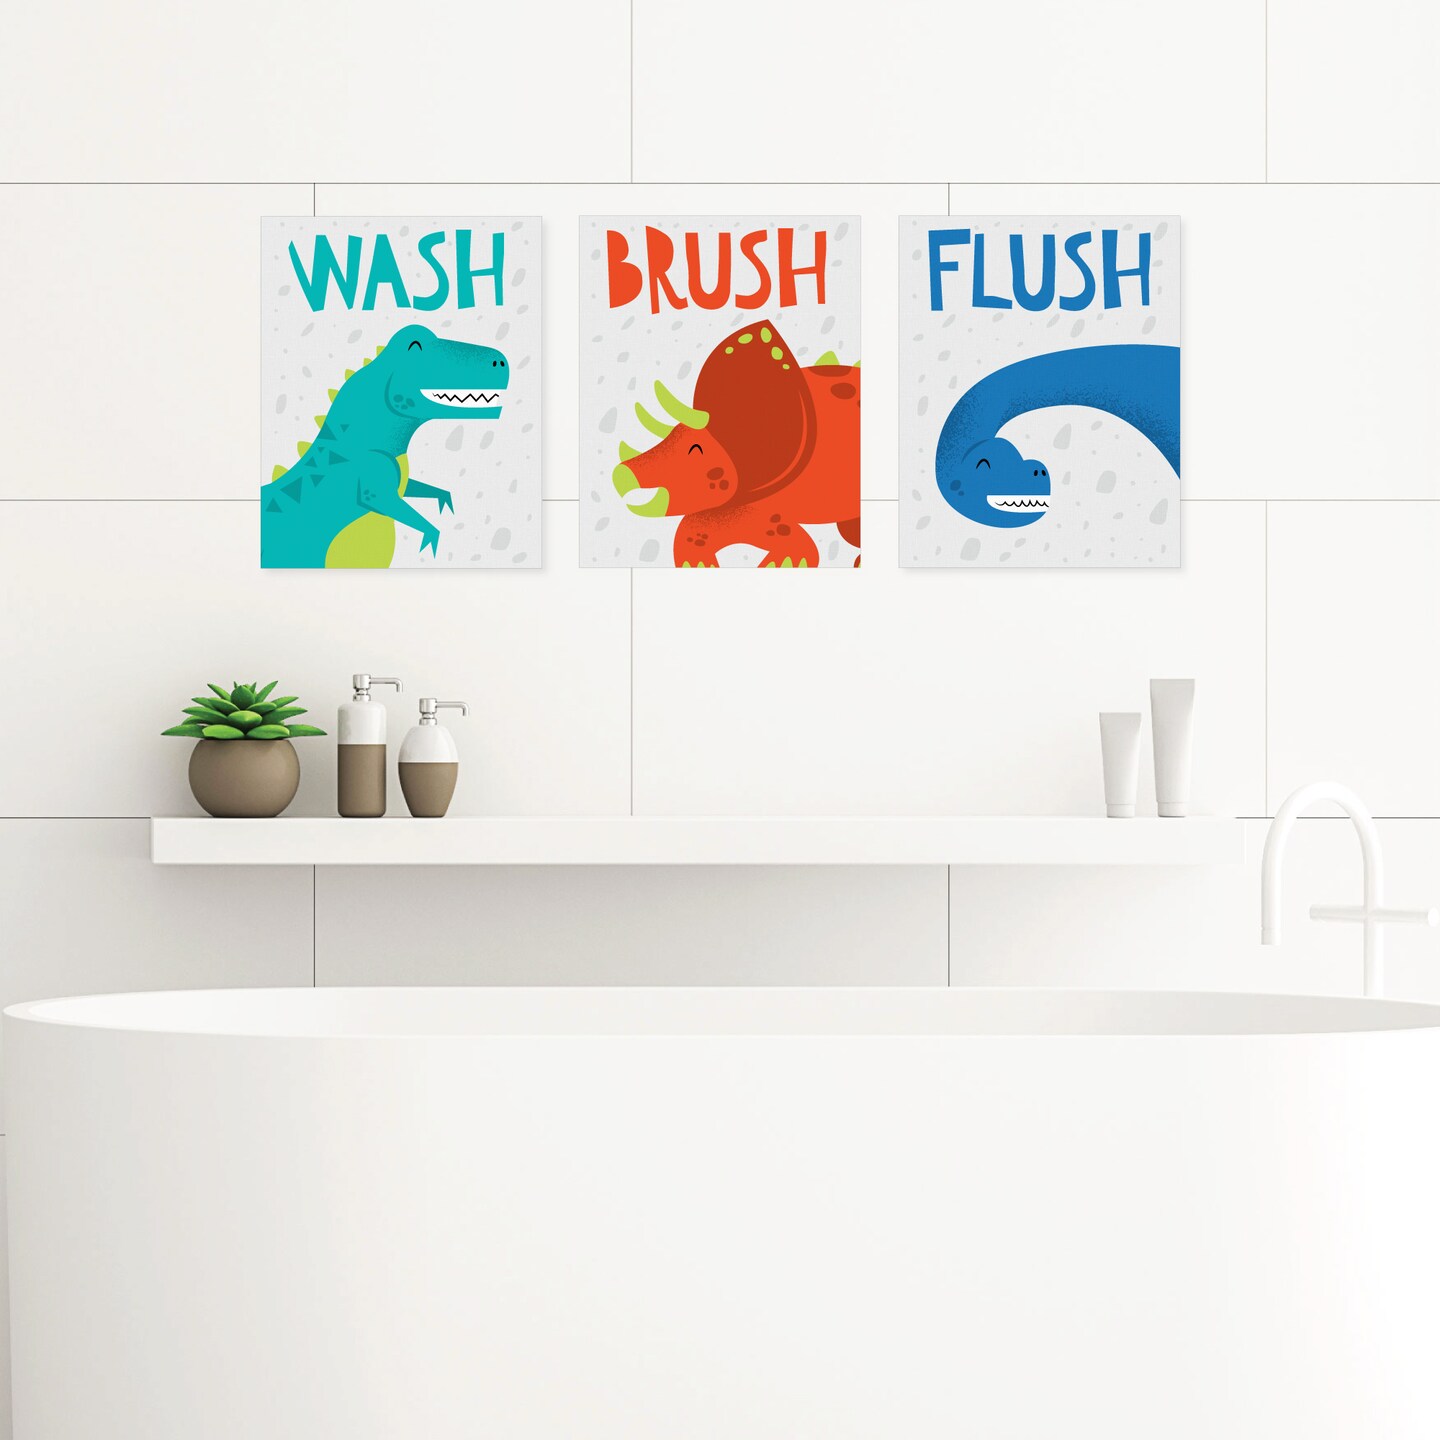 Personalized Dinosaur Wall Art, Set of 2, Collection: A Roar Party